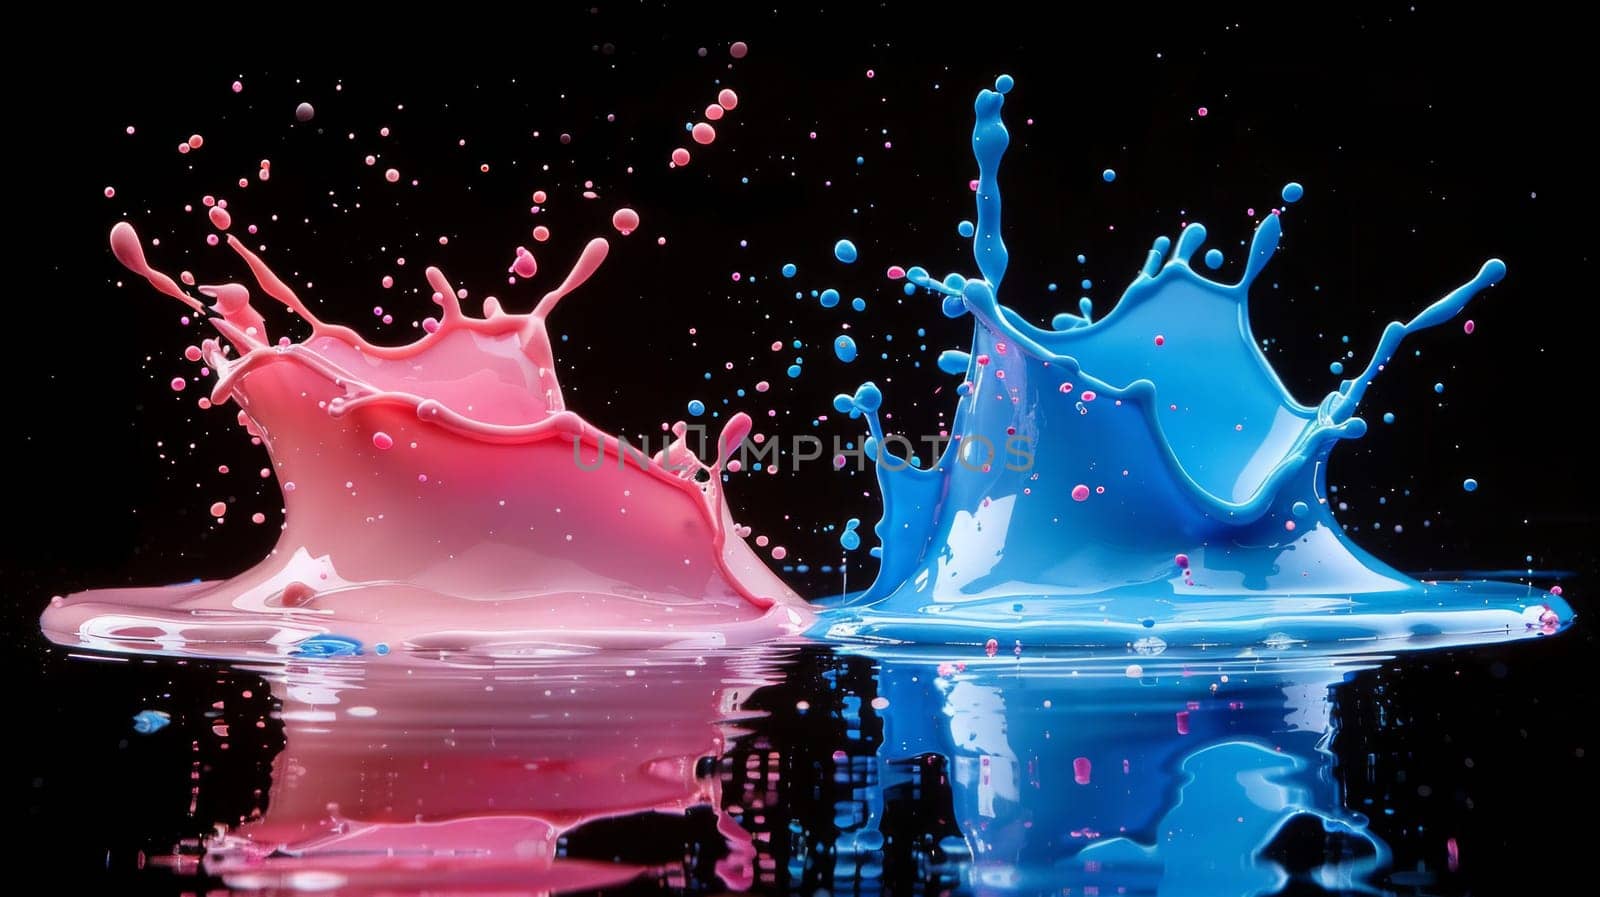 A vibrant splash of blue and pink water dances elegantly on a mysterious black canvas, creating a mesmerizing and dynamic visual experience by but_photo